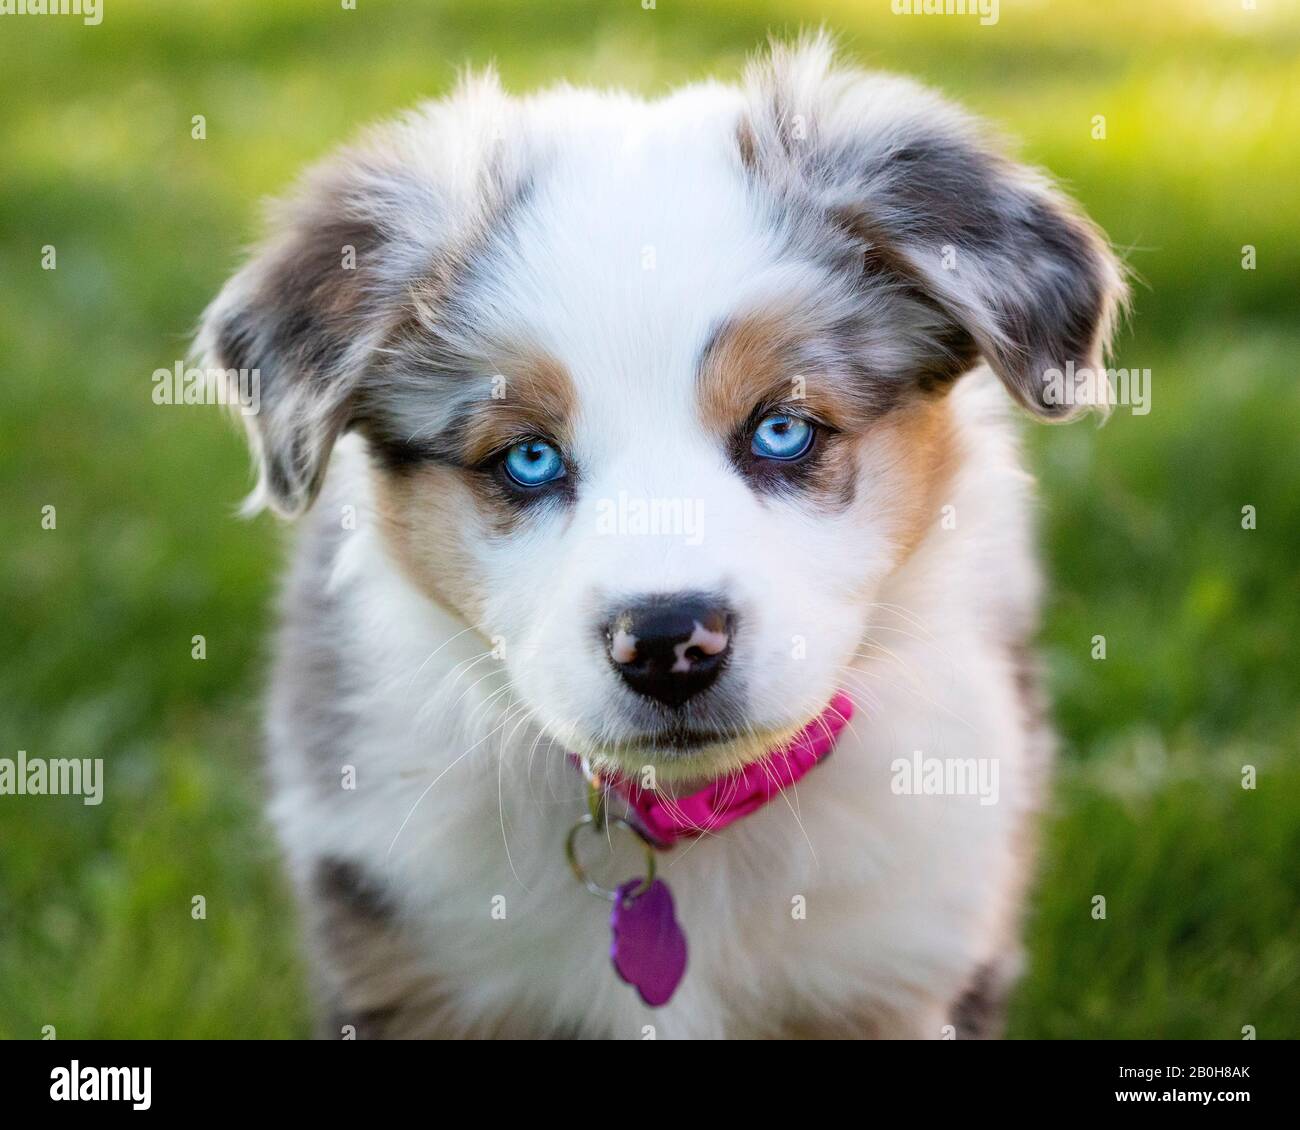 Australian Shepherd Puppy, outside on sunny lawn, with blue eyes, looking at camera. Stock Photo